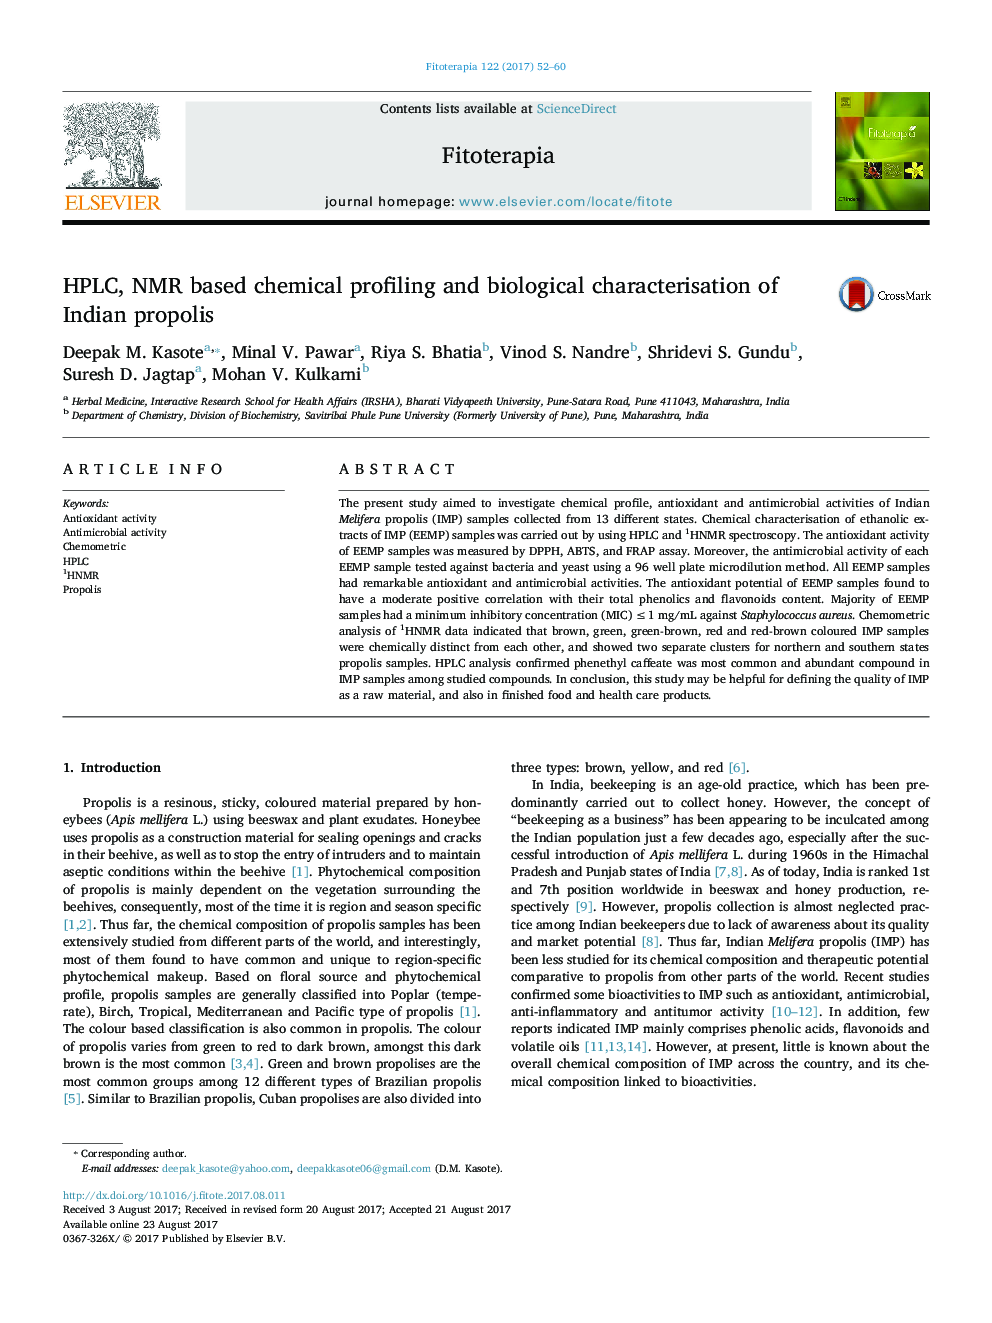 HPLC, NMR based chemical profiling and biological characterisation of Indian propolis